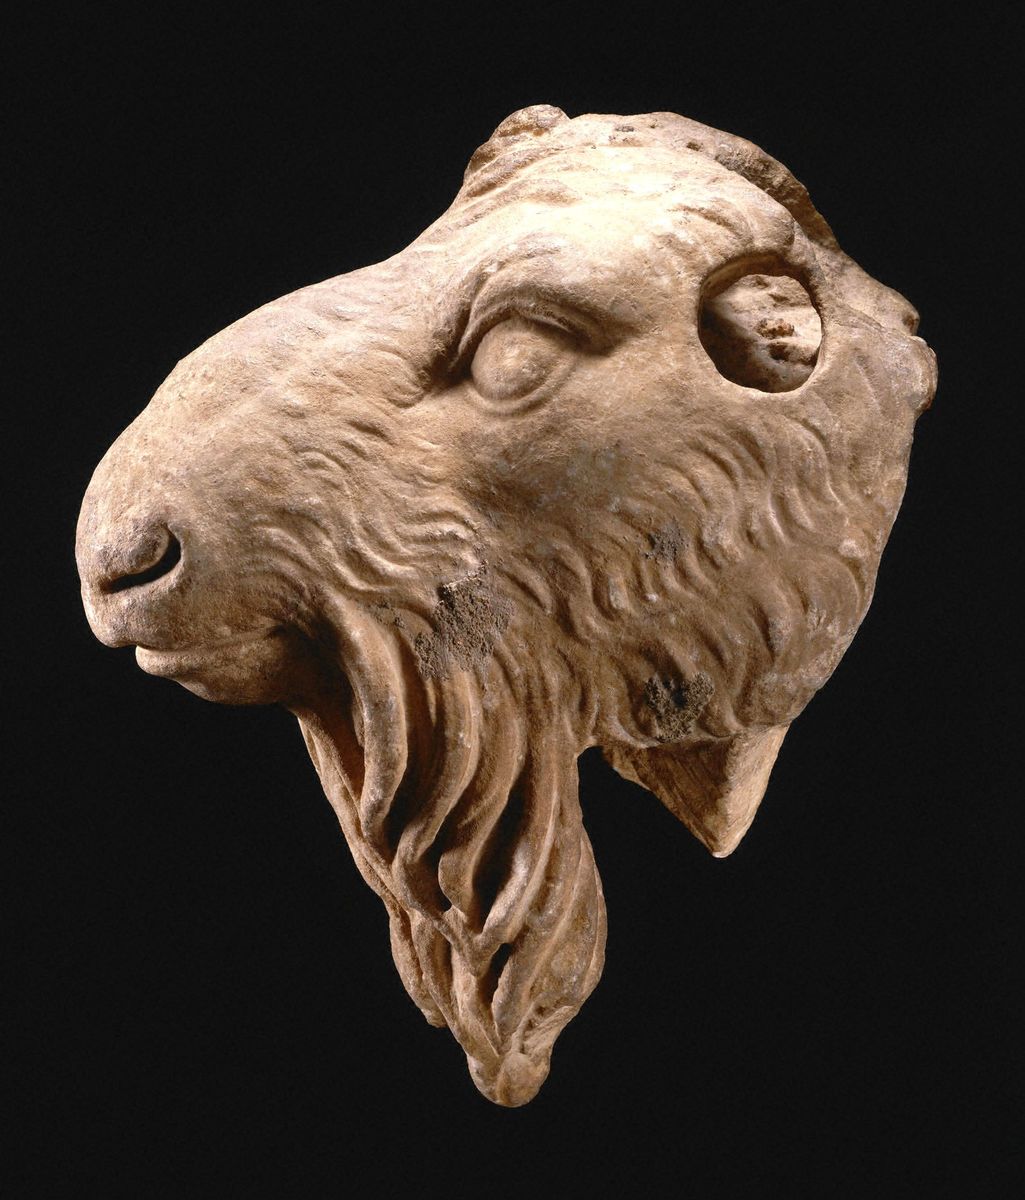 Roman, Julio-Claudian, Head of a goat. Museum purchase, John Maclean Magie, Class of 1892, and Gertrude Magie Fund